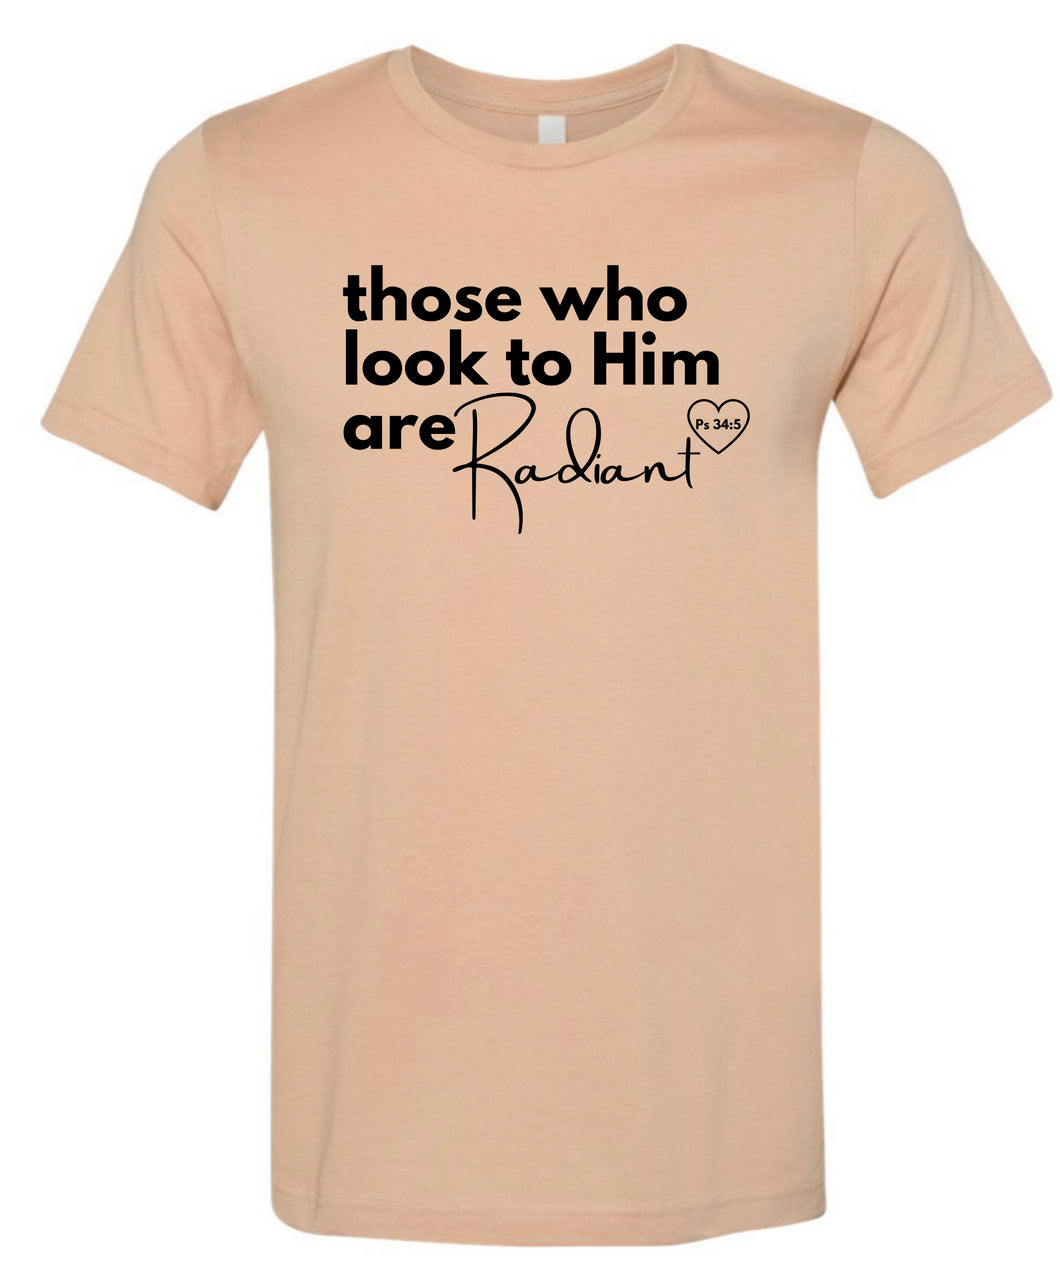 Those who look to Him are Radiant Short Sleeve Tee